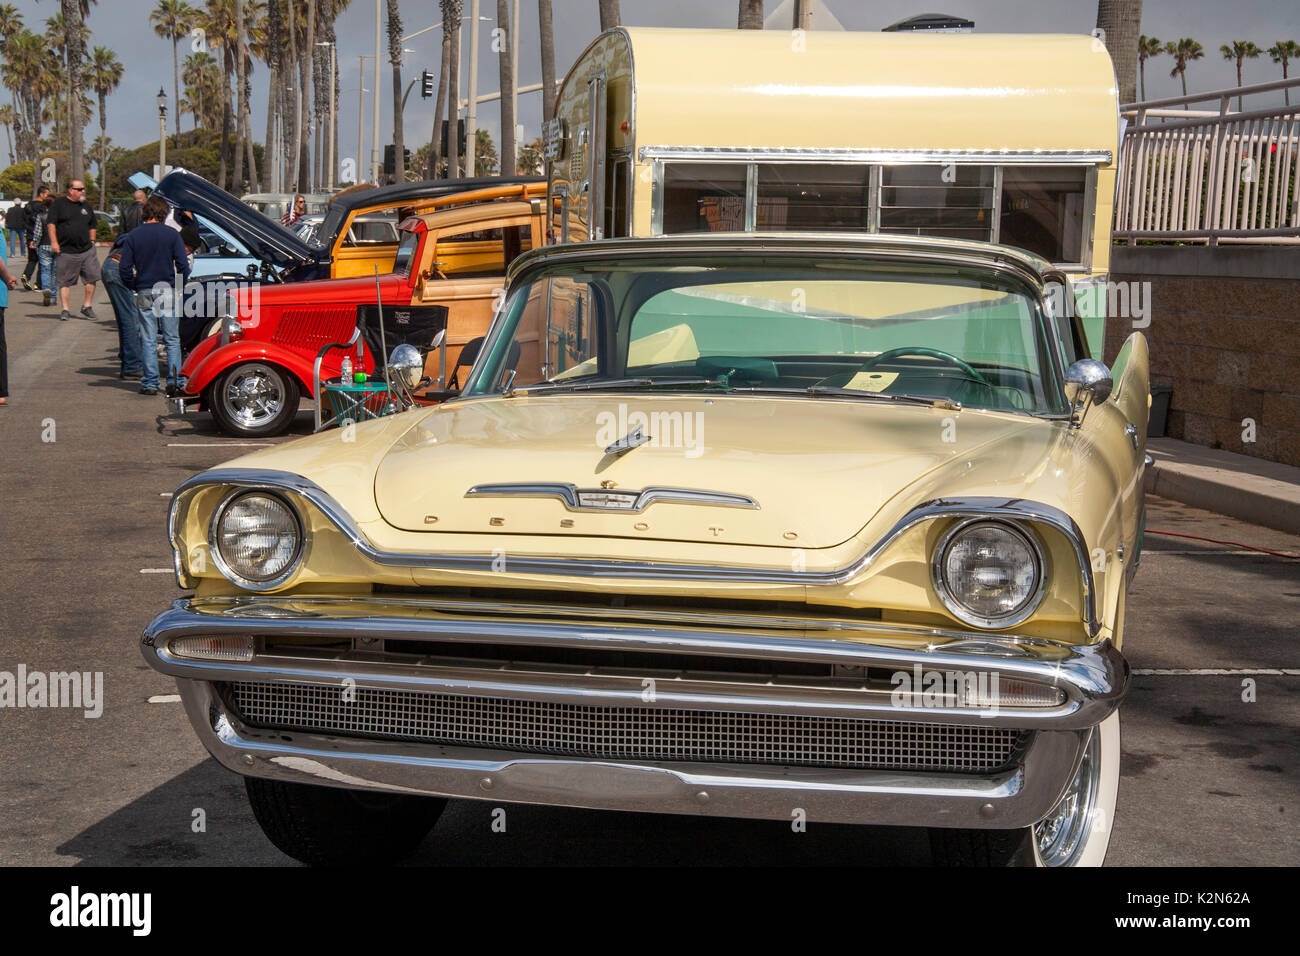 A 1957 DeSoto 'Sportsman' car is hitched to a 1962 Shasta trailer at a classic car show in Huntington Beach, CA. Note classic Ford 'woodie' in background. Stock Photo